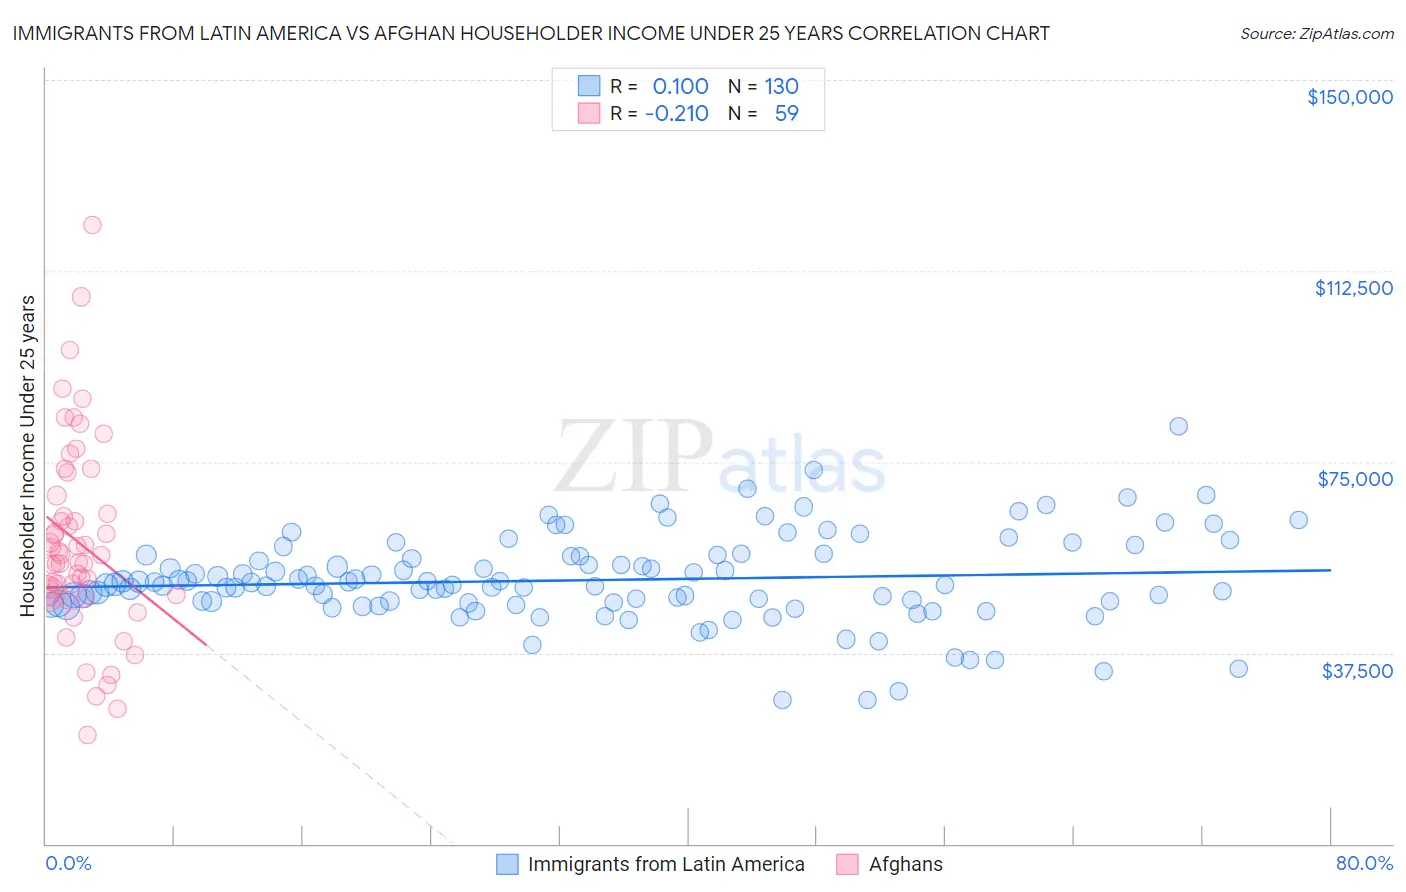 Immigrants from Latin America vs Afghan Householder Income Under 25 years